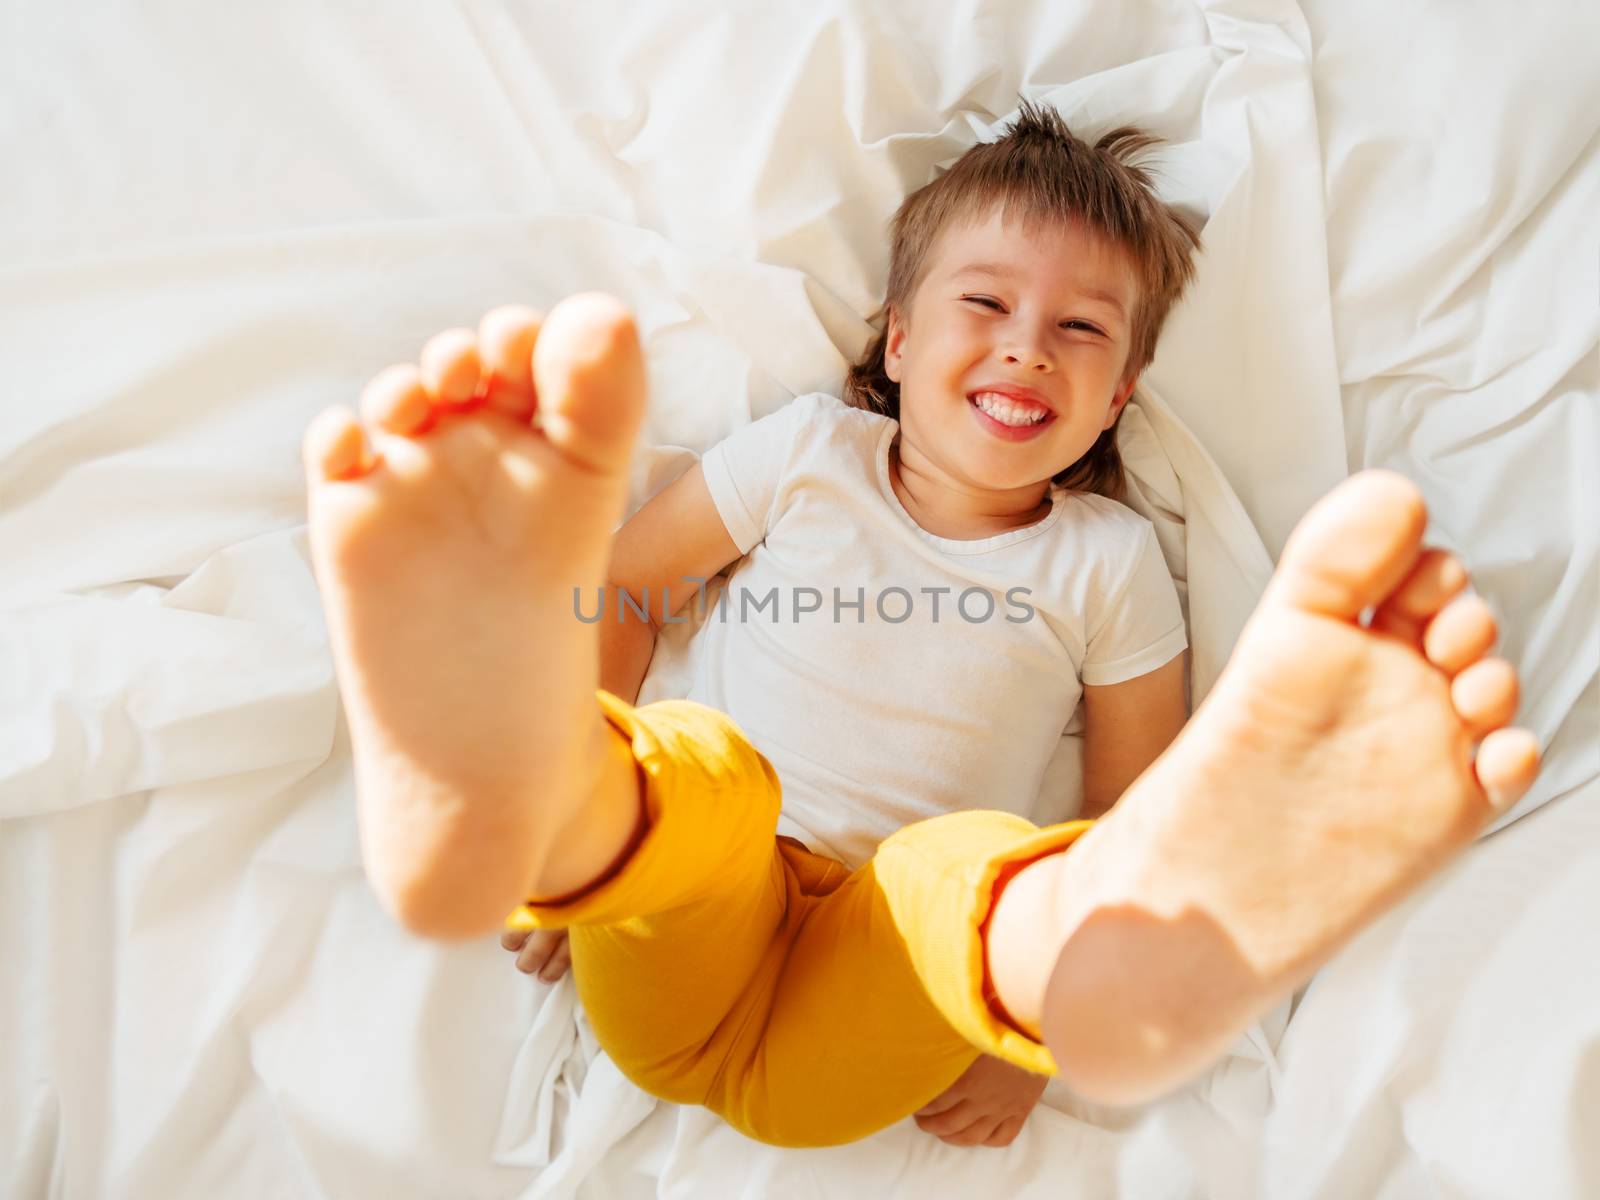 Little boy is lying upside down on the bed and laughing happily. Joyful toddler. Playful child shows his feet in the air. Sunny morning in cozy home.